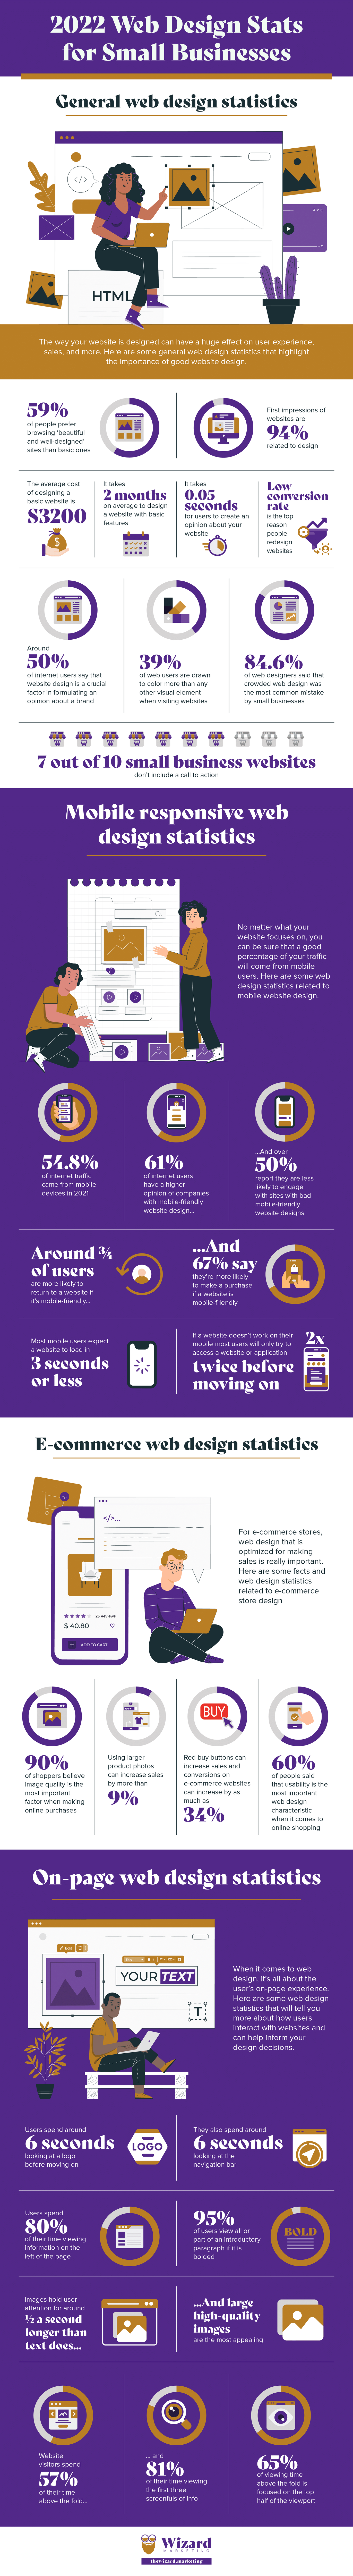 2022 Web Design Stats For Small Businesses [Infographic] At Wizard Marketing 2